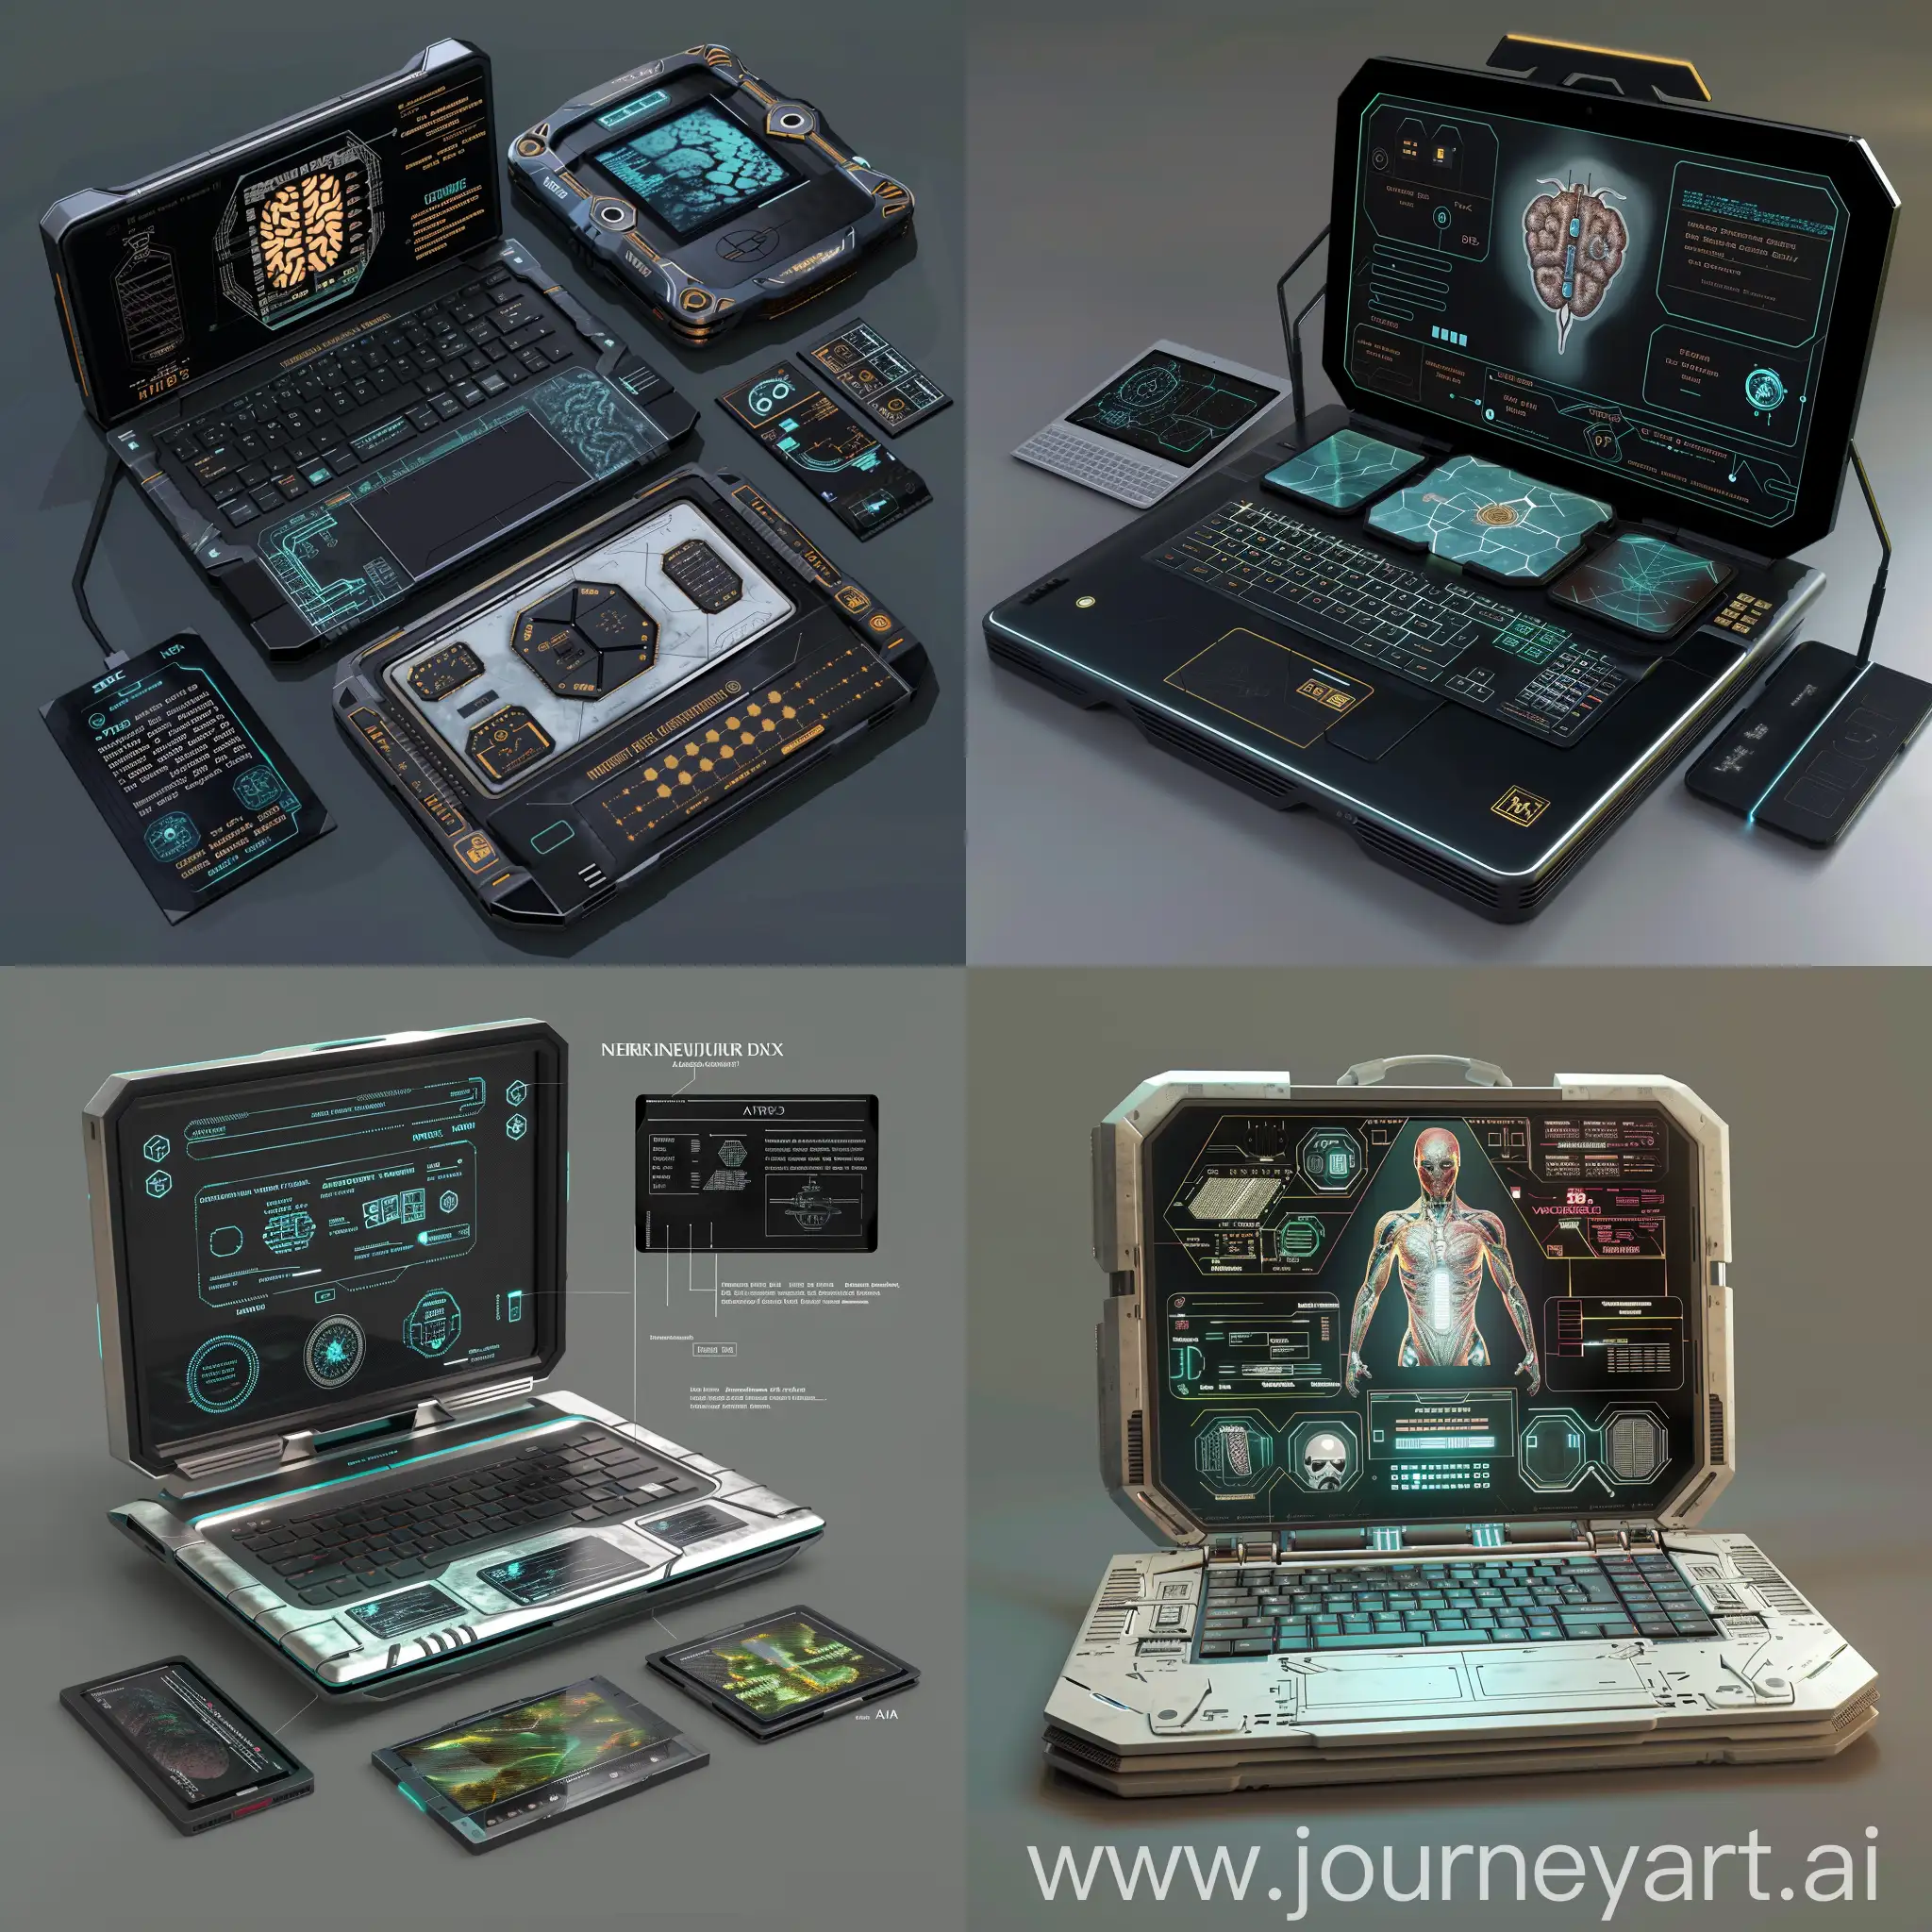 Futuristic laptop, Neural Processing Unit (NPU) inspired by "Strange Days" (1995), Bio-Organic Battery (BOB) inspired by "Avatar" (2009), Morphing Display (MD) inspired by "Terminator 2: Judgment Day" (1991), Self-Repairing Chassis (SRC) inspired by "The T-X" from "Terminator 3: Rise of the Machines" (2003), Universal Translator (UT) inspired by "Arrival" (2016), Emotion Sensor (ES) inspired by "Minority Report" (2002), Emotion Sensor (ES) inspired by "Minority Report" (2002), Quantum Encryption Engine (QEE) inspired by "Inception" (2010), Weather-Adaptive Cooling System (WACS) inspired by "Waterworld" (1995), Holographic Keyboard (HK) inspired by "Star Wars" franchise, Morphing Skin (MS) inspired by "Annihilation" (2018), E Ink Display Lid (EIDL) inspired by "Minority Report" (2002), Solar Charging Back (SCB) inspired by "Sunshine" (2007), Biometric Fingerprint Lock (BFL) inspired by "Blade Runner" (1982), Augmented Reality Bezel (ARB) inspired by " Paprika" (2006), Kinetic Hinge (KH) inspired by "The Cell" (2004), Modular Expansion Ports (MEP) inspired by "Cloud Atlas" (2012), Mood Lighting (ML) inspired by "Her" (2013), Wireless Charging Mat (WCM) inspired by "Inception" (2010), AI-Powered Assistant Projector (AIPA) inspired by "Her" (2013), unreal engine 5 --stylize 1000